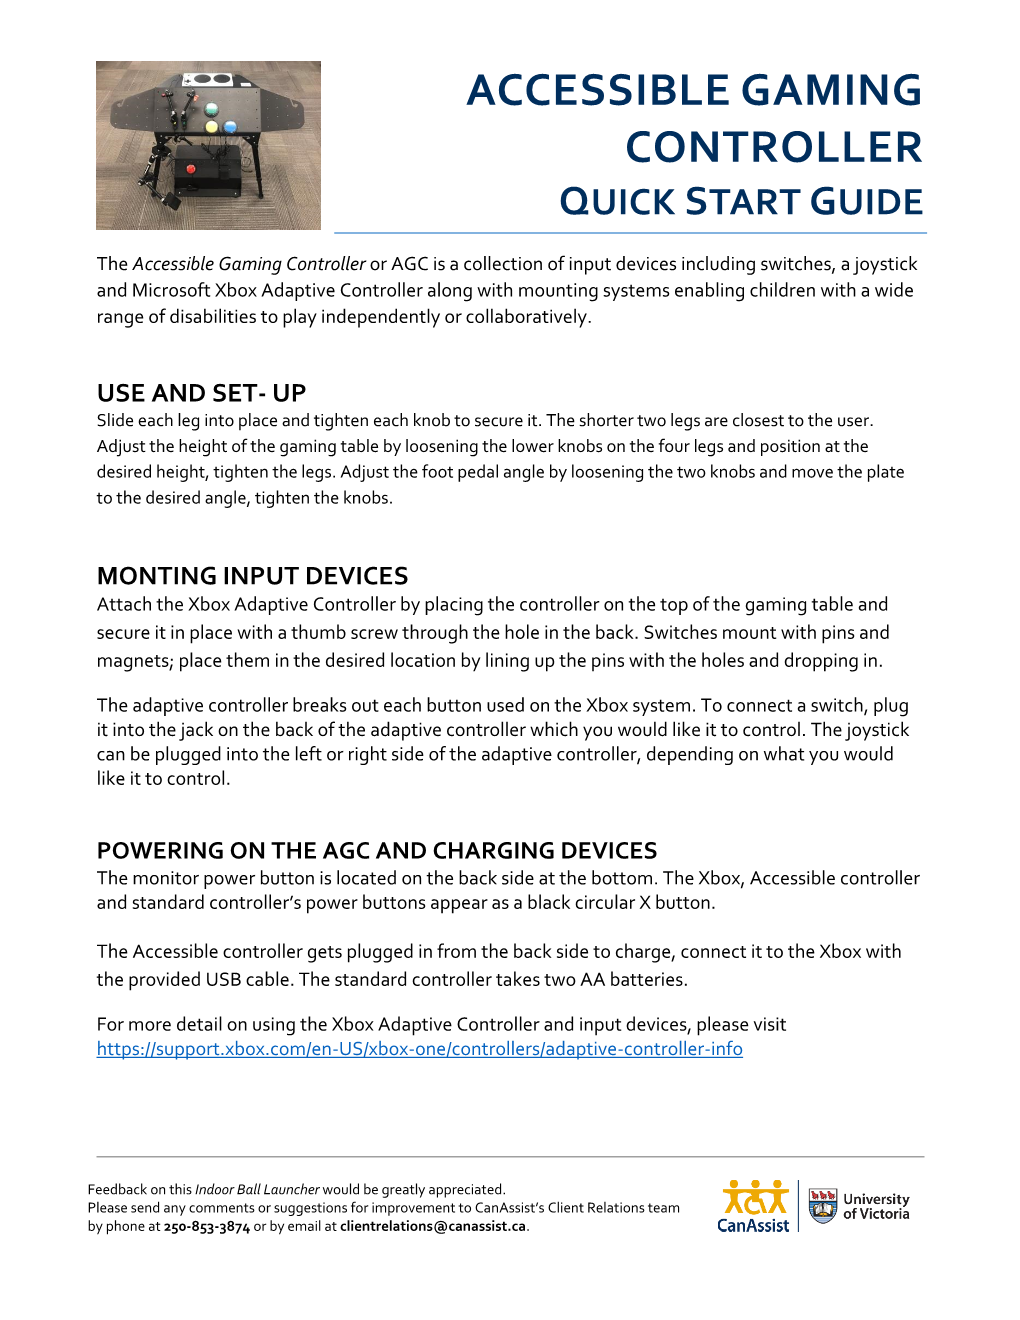 Accessible Gaming Controller Quick Start Guide